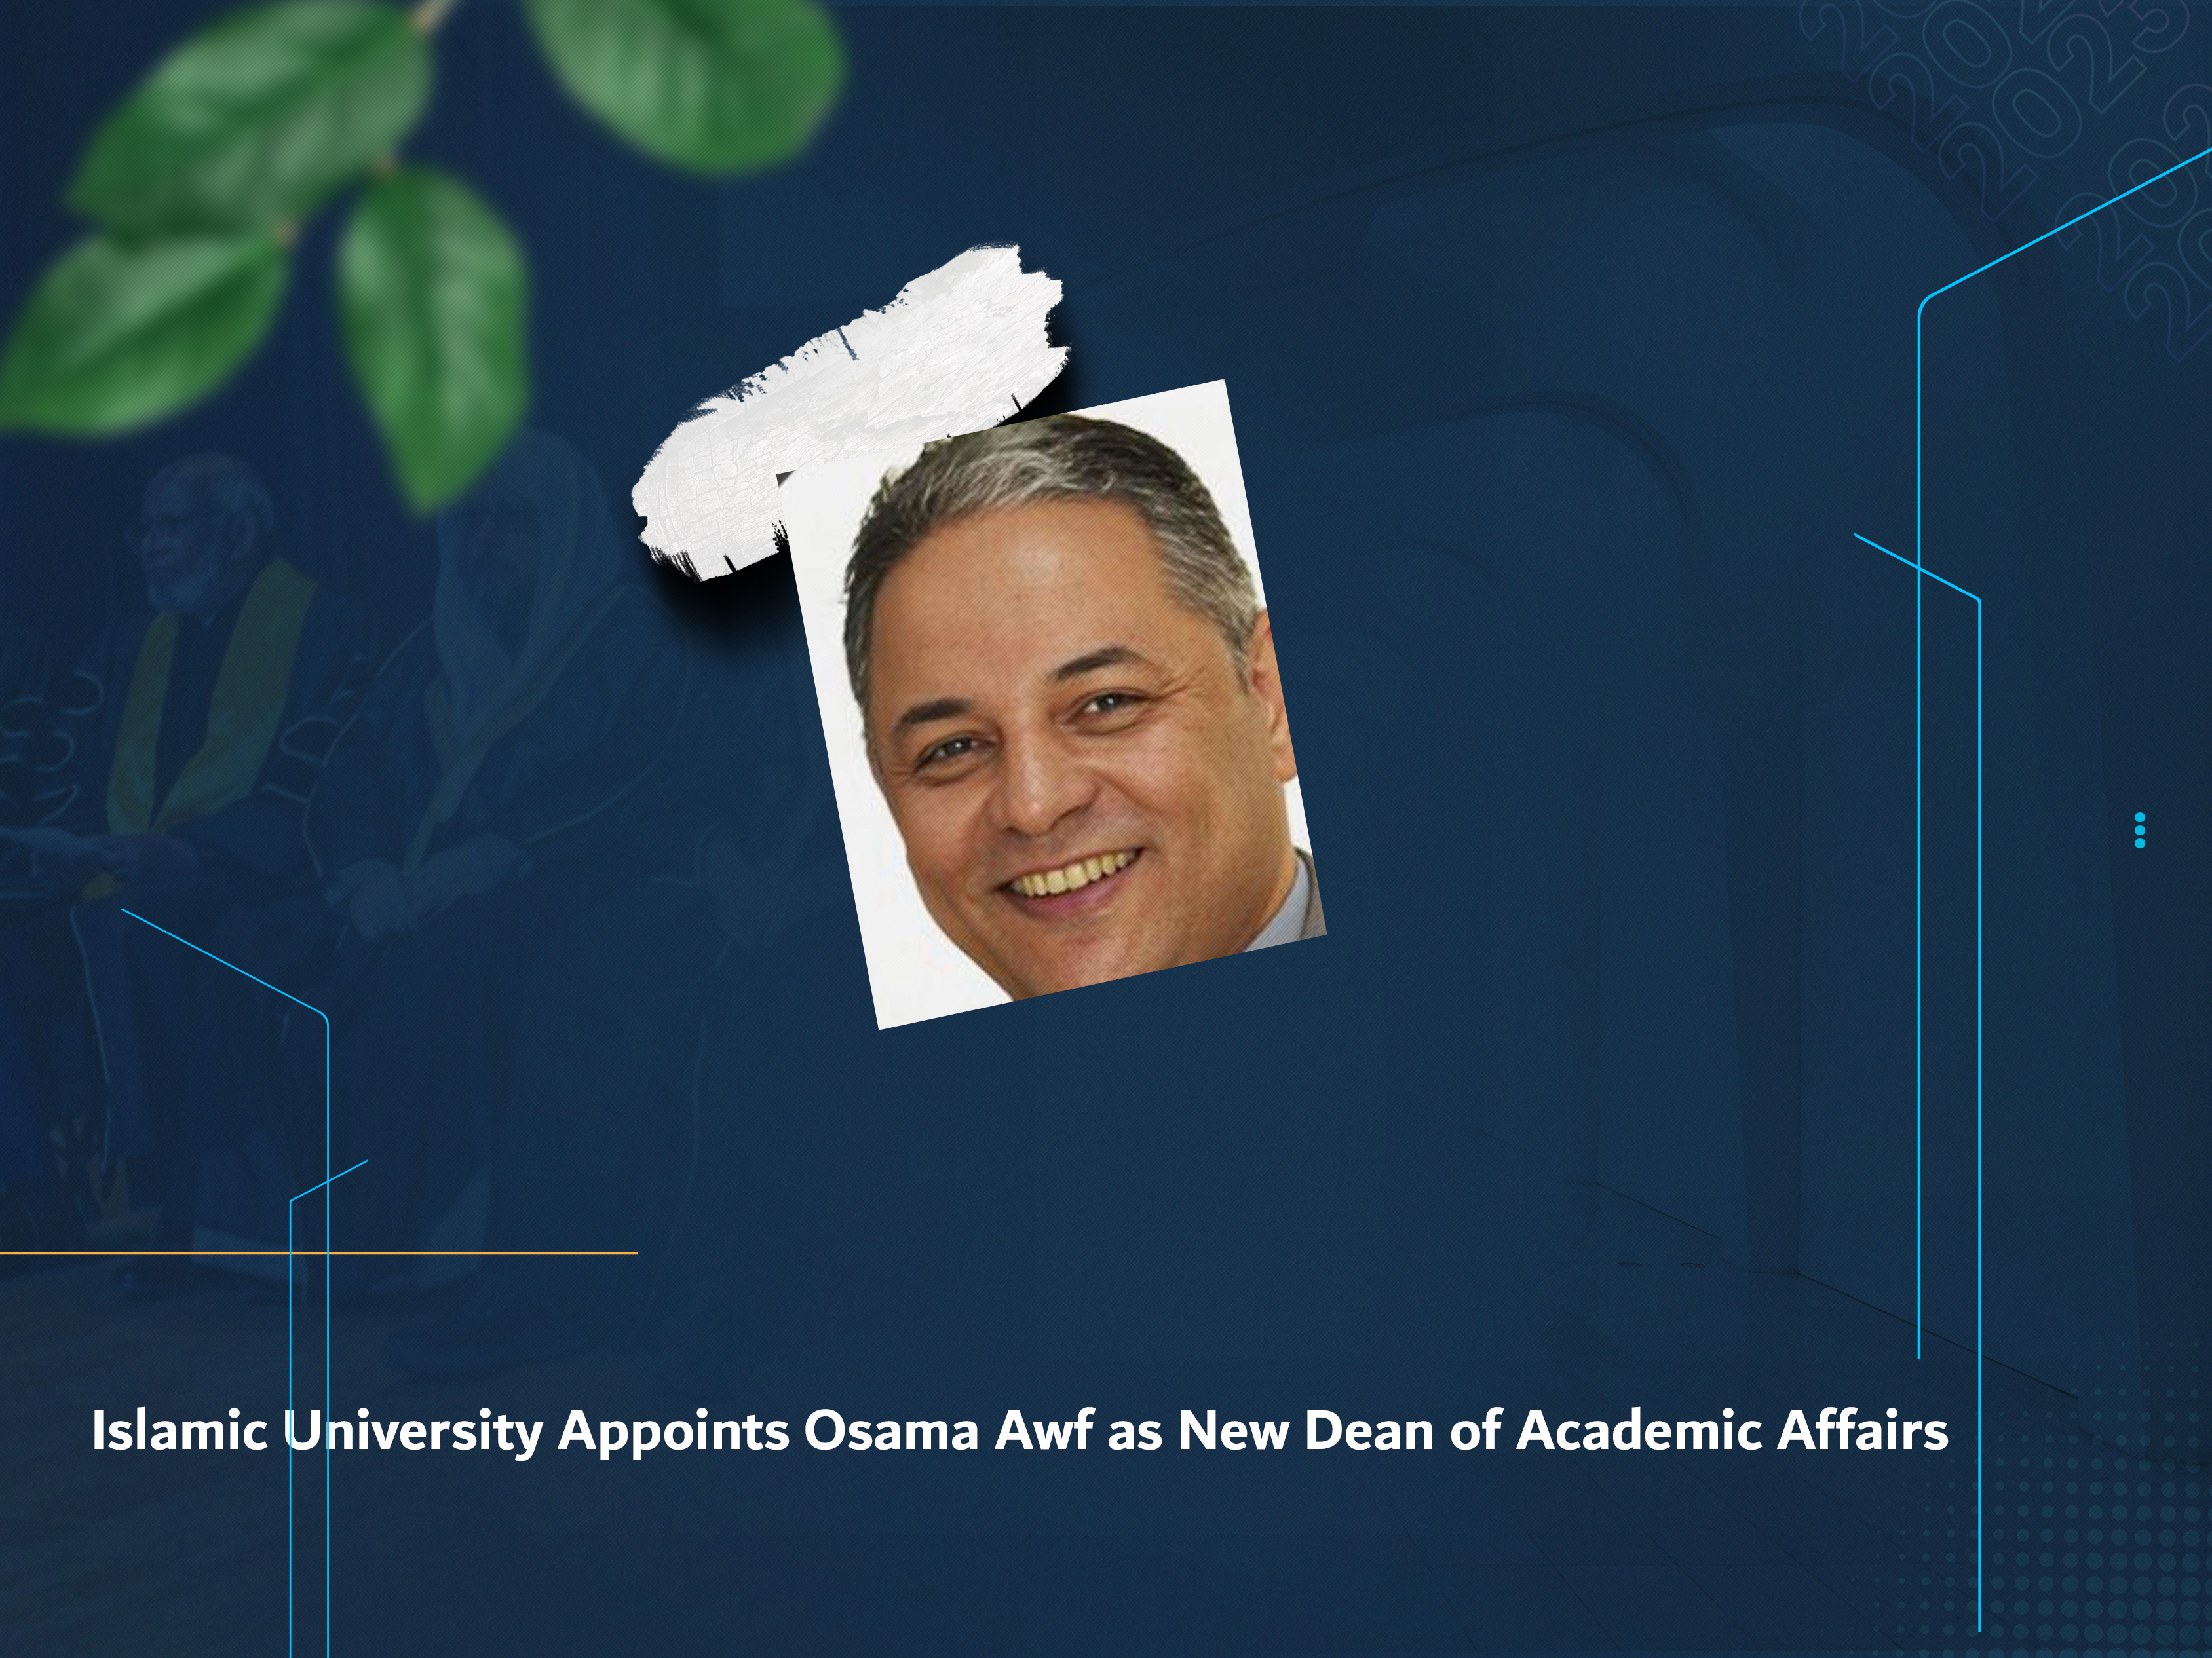 Islamic University Appoints Osama Awf as New Dean of Academic Affairs